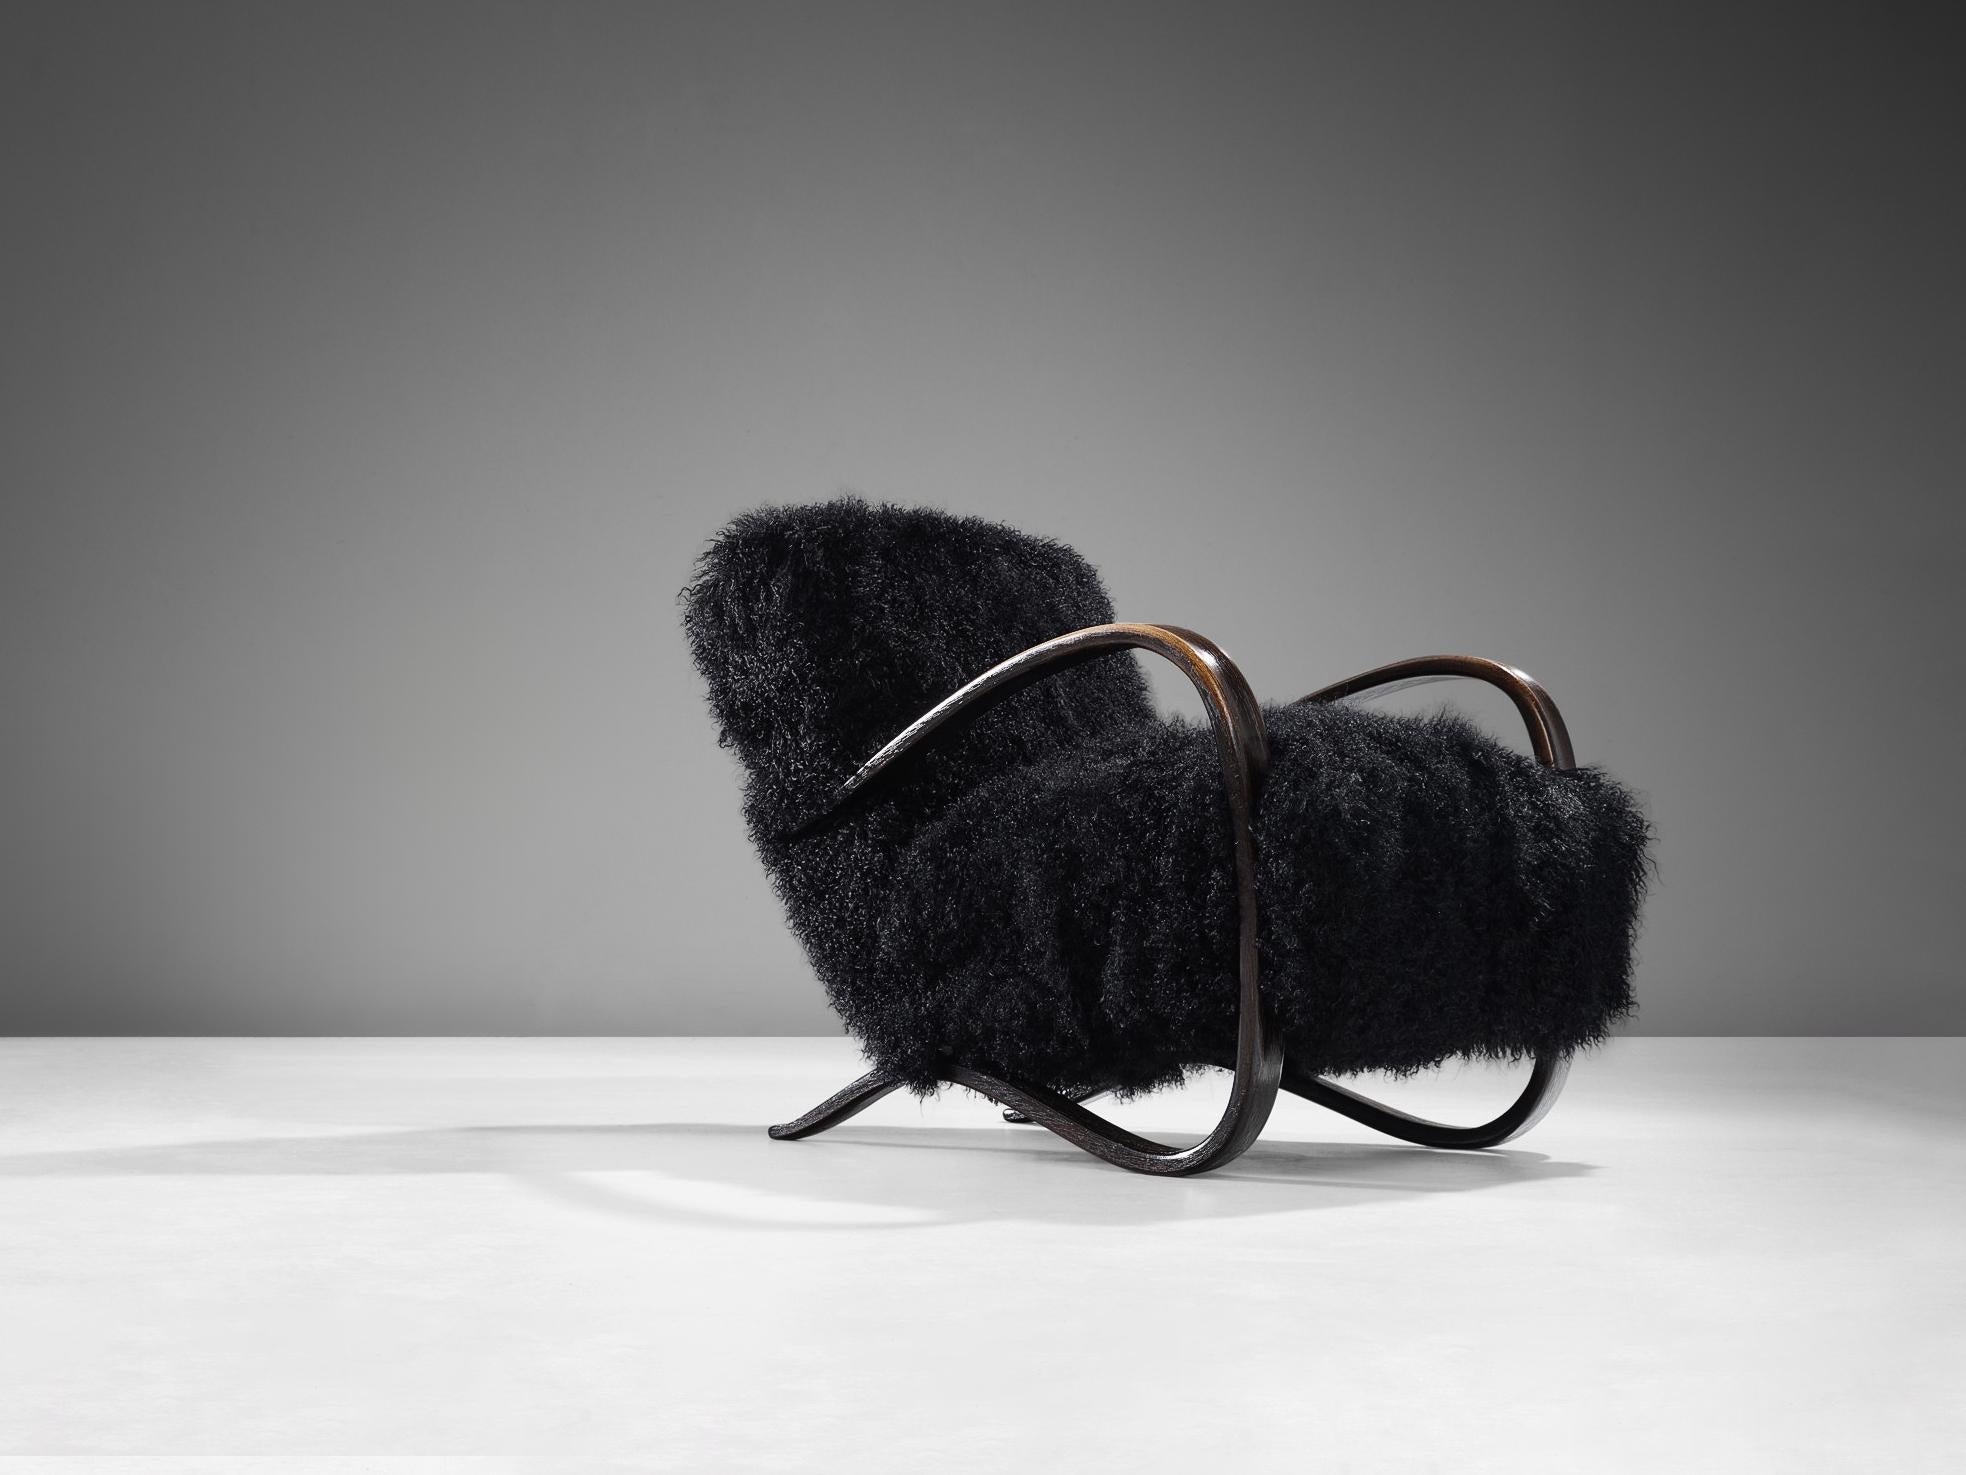 Jindrich Halabala, lounge chair, model 'H269', stained beech, Tibetan lambswool, Czech Republic, 1930s.

Extraordinary easy chair in black Tibetan lambswool upholstery. This design has a very dynamic and abundant appearance and the fuzzy upholstery